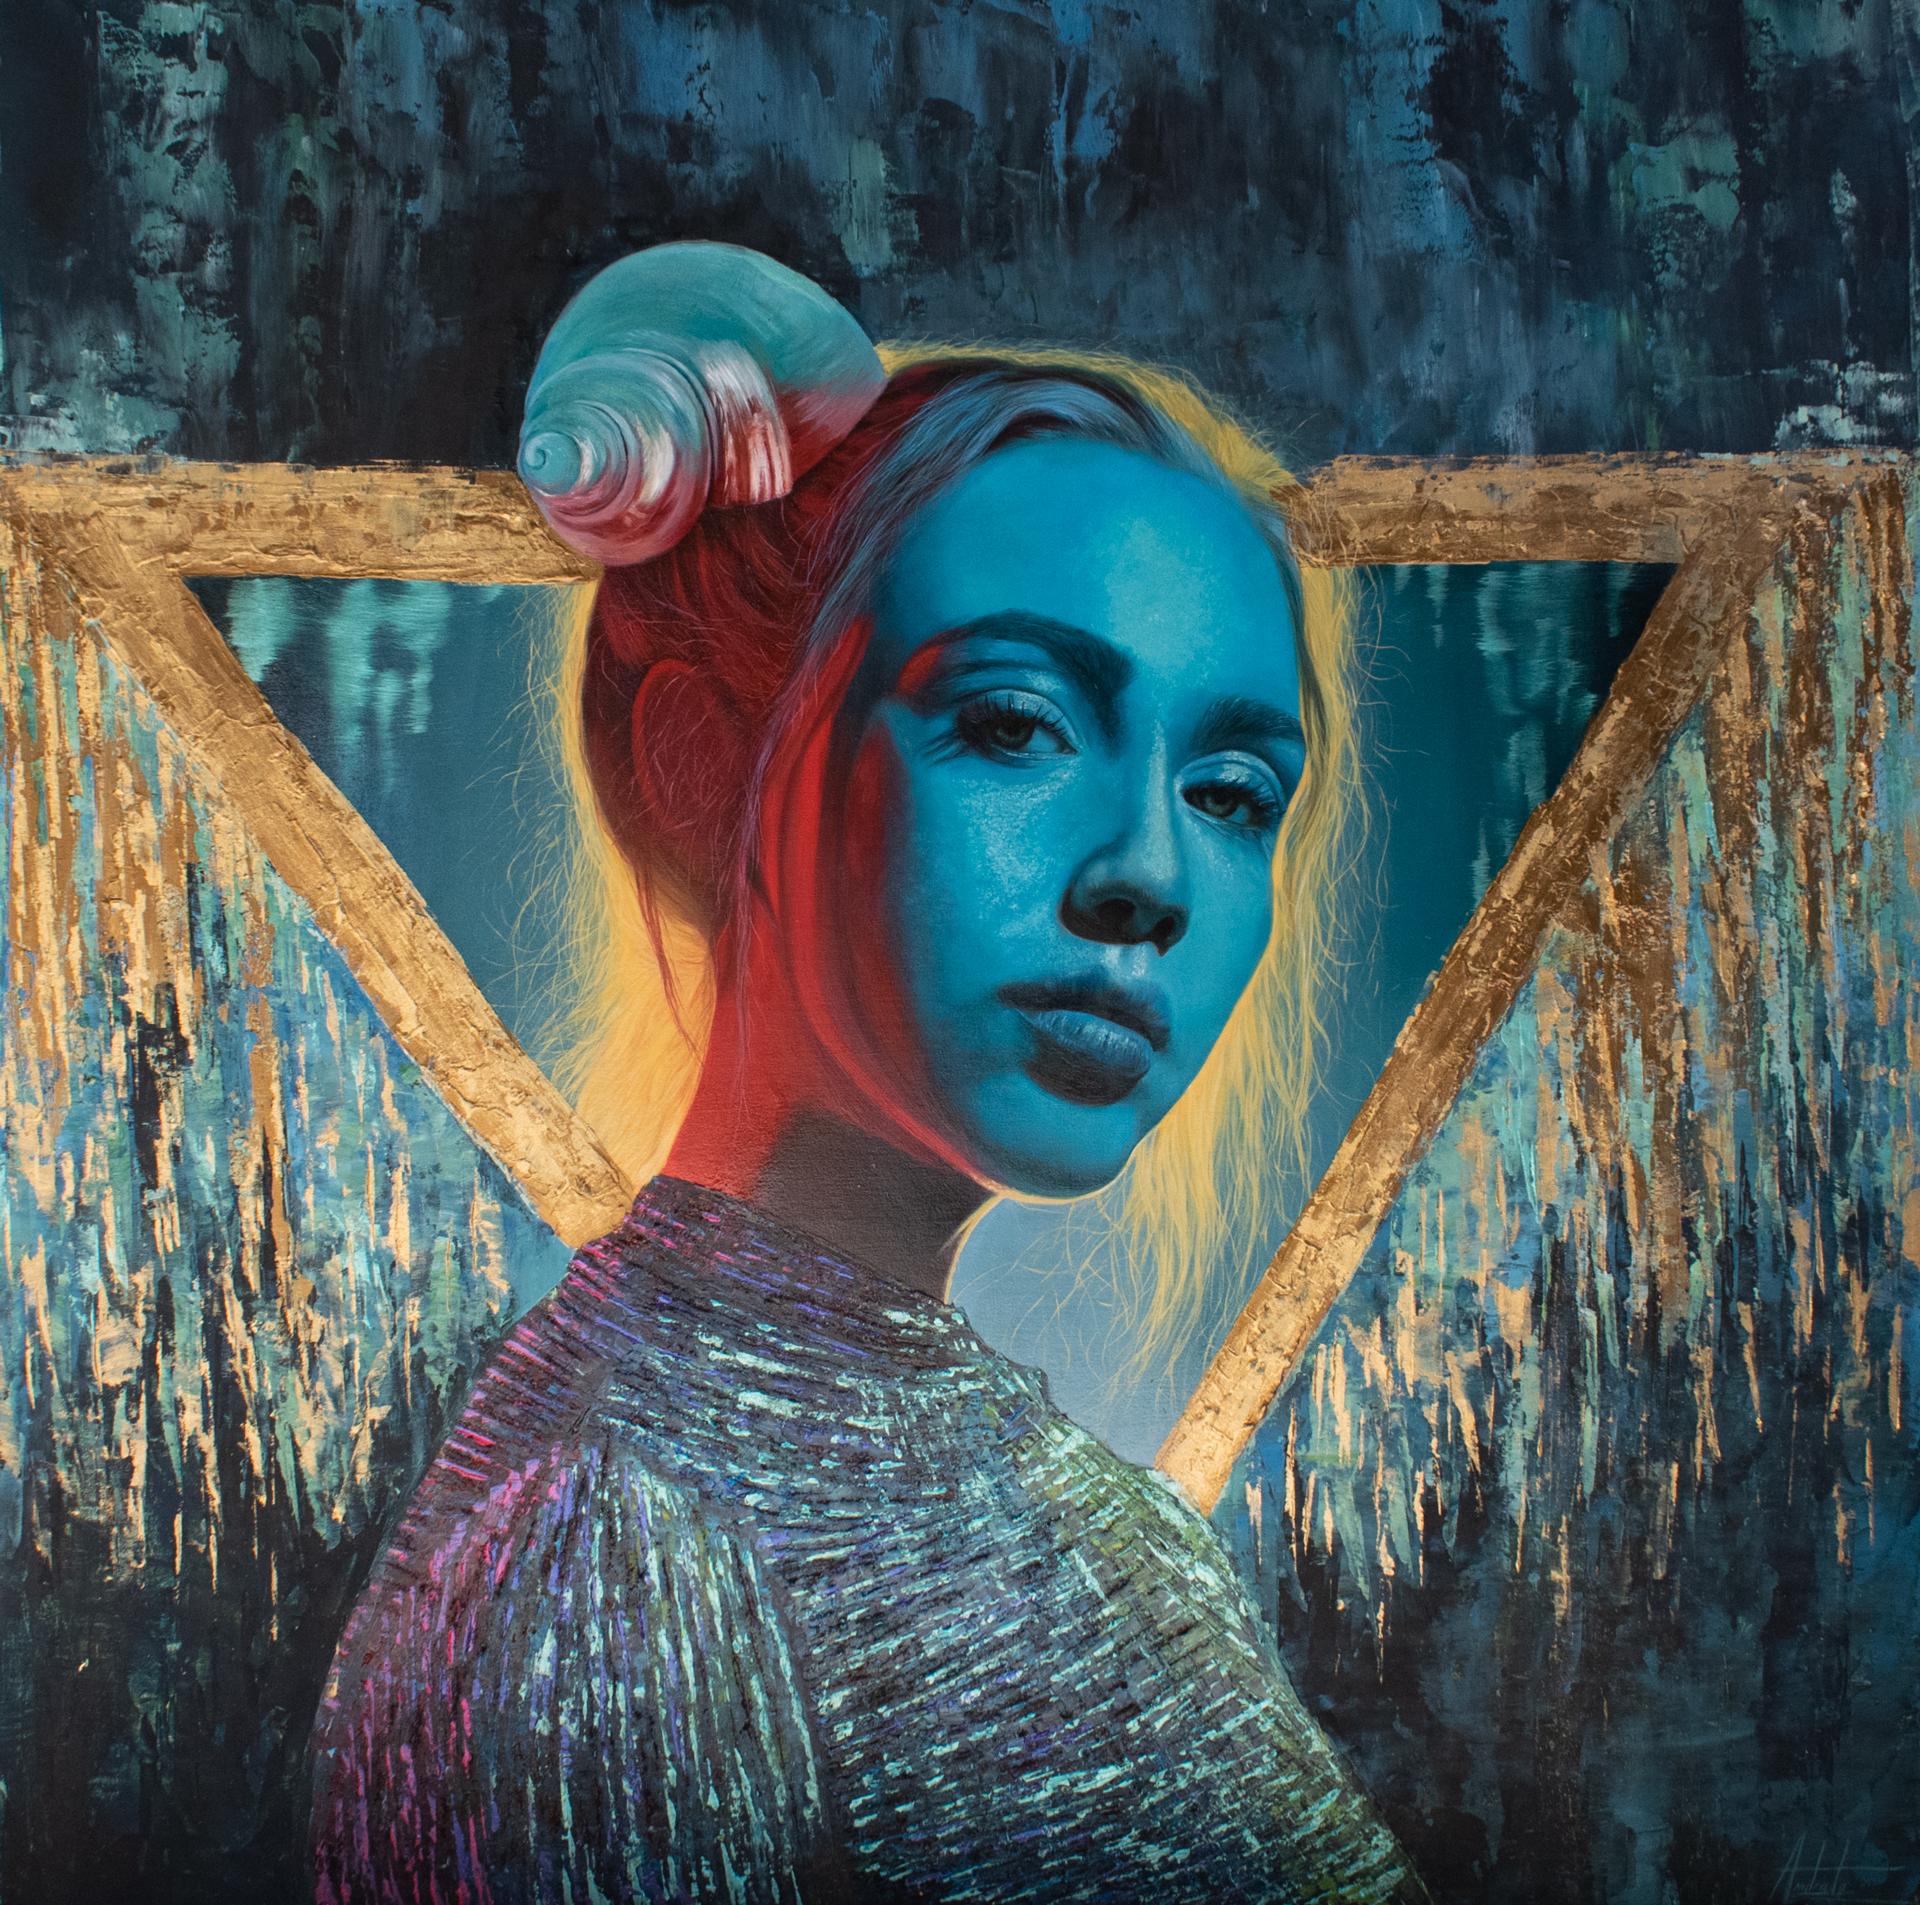 "Blue Aura" by Andrada Trapnell, a stunning mixed media artwork from 2022, measures 24 x 24 inches and is executed on board. This piece presents an ethereal portrait of a woman, bathed in a radiant blue light that highlights her contemplative